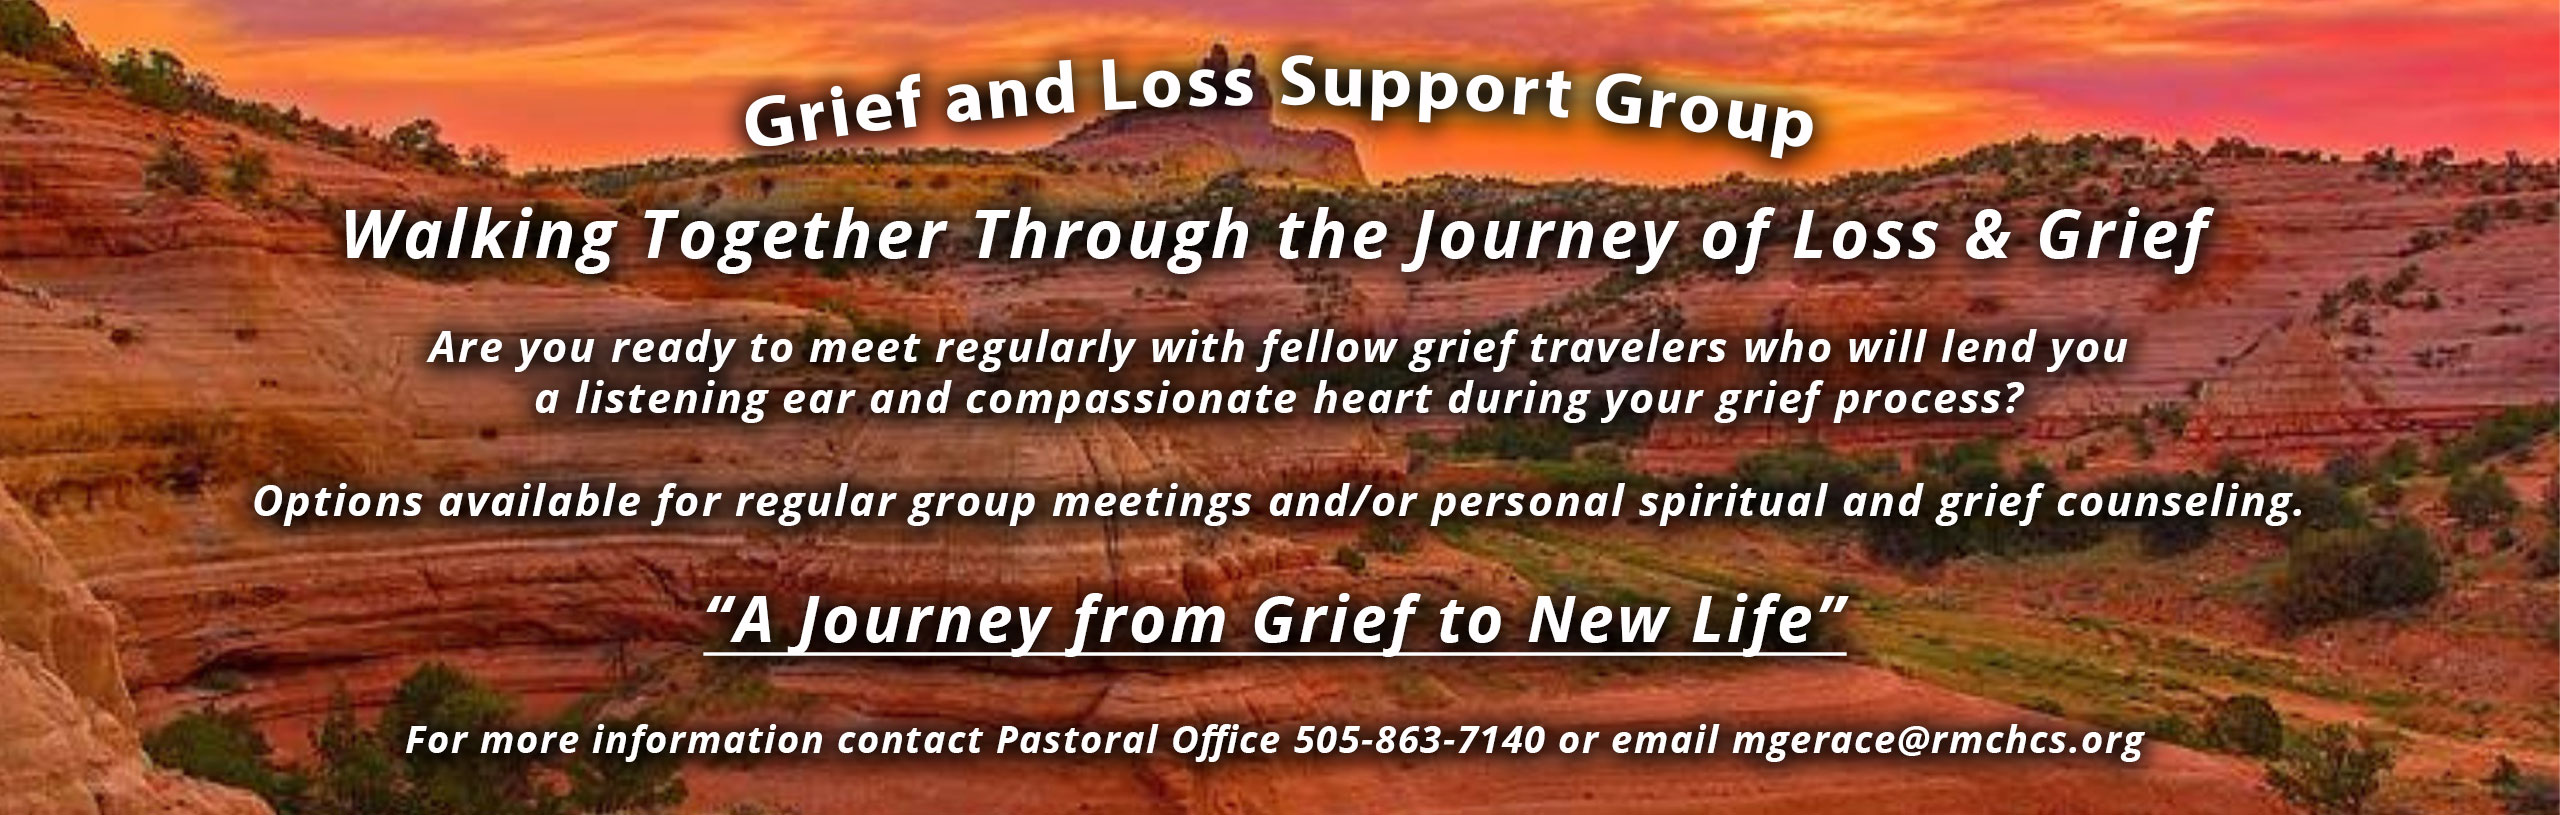 Grief and Loss Support Group
Walking Together Through the Journey of Loss & Grief
Are you ready to meet regulars with fellow grief travelers who will lend you a listening ear and compassionate heart during your grief process?

Options available for regular group meetings and/or personal spiritual and grief counseling.

"A Journey from Grief to New Life"
For more information contact Pastoral Office 505-863-7140 or email mgerace@rmchcs.org